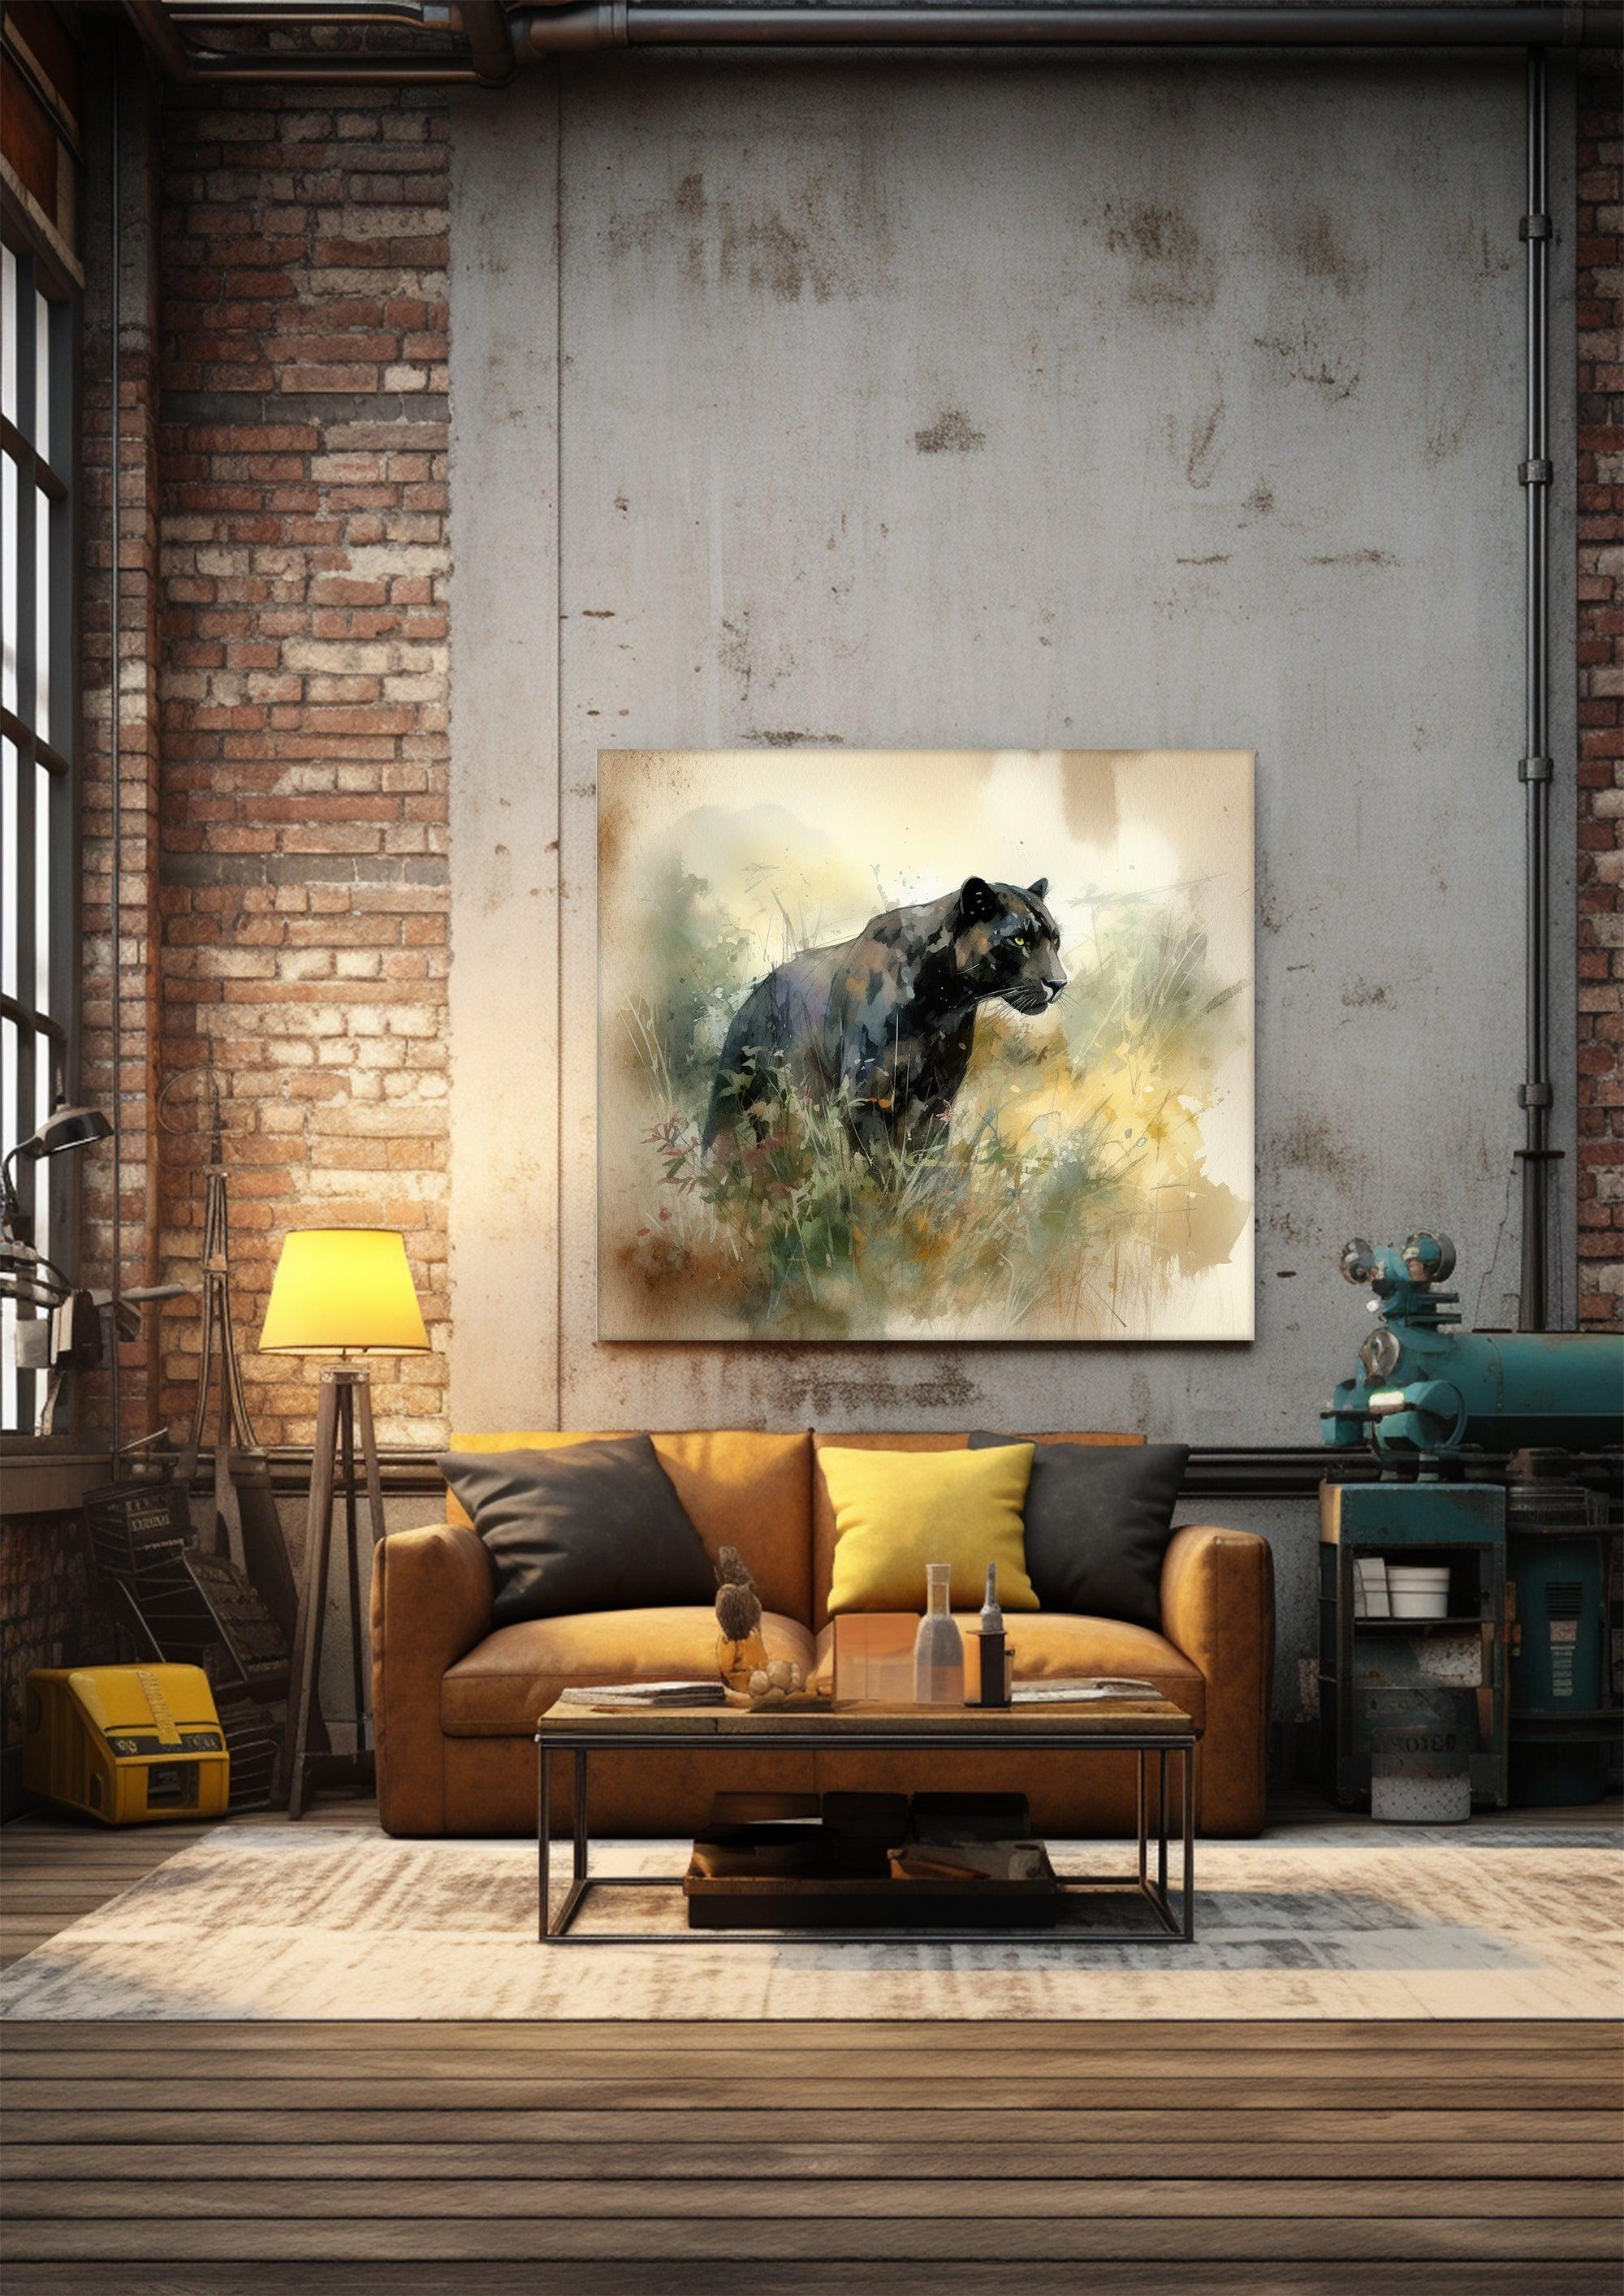 A Black Panther Prowl - Vintage Watercolor Wall Art Print - Handcrafted Home Decor with Digital Download Option